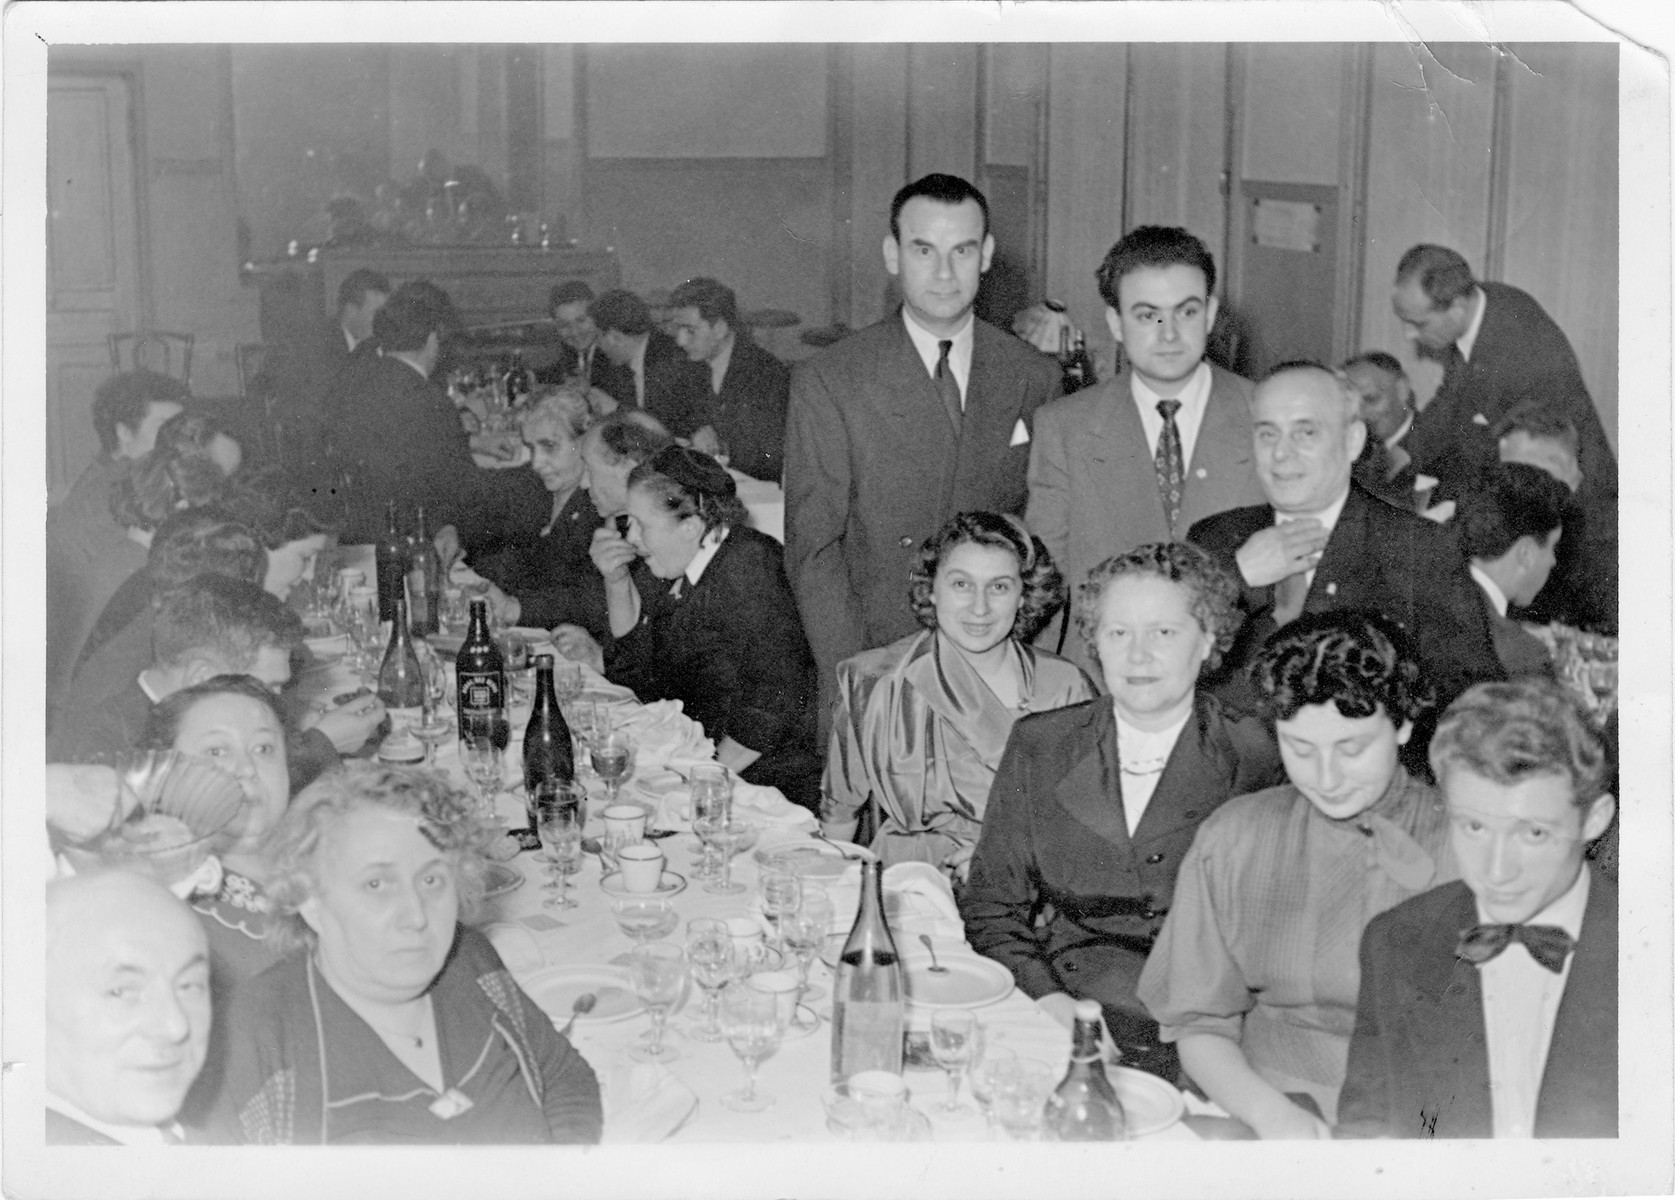 A large extended Jewish family in France celebrates a wedding anniversary.

Faige Tuba Perelstein is seated on the left.  Seated on the right are (back to front) Eva Pelc, Mrs. Victor Perelstein, Lilly Perelstein Jedab, her husban Mr. Jedwab.  Standing behind them (back to front) are Jules Pelc, Rene Perelstein and Victor Perelstein.